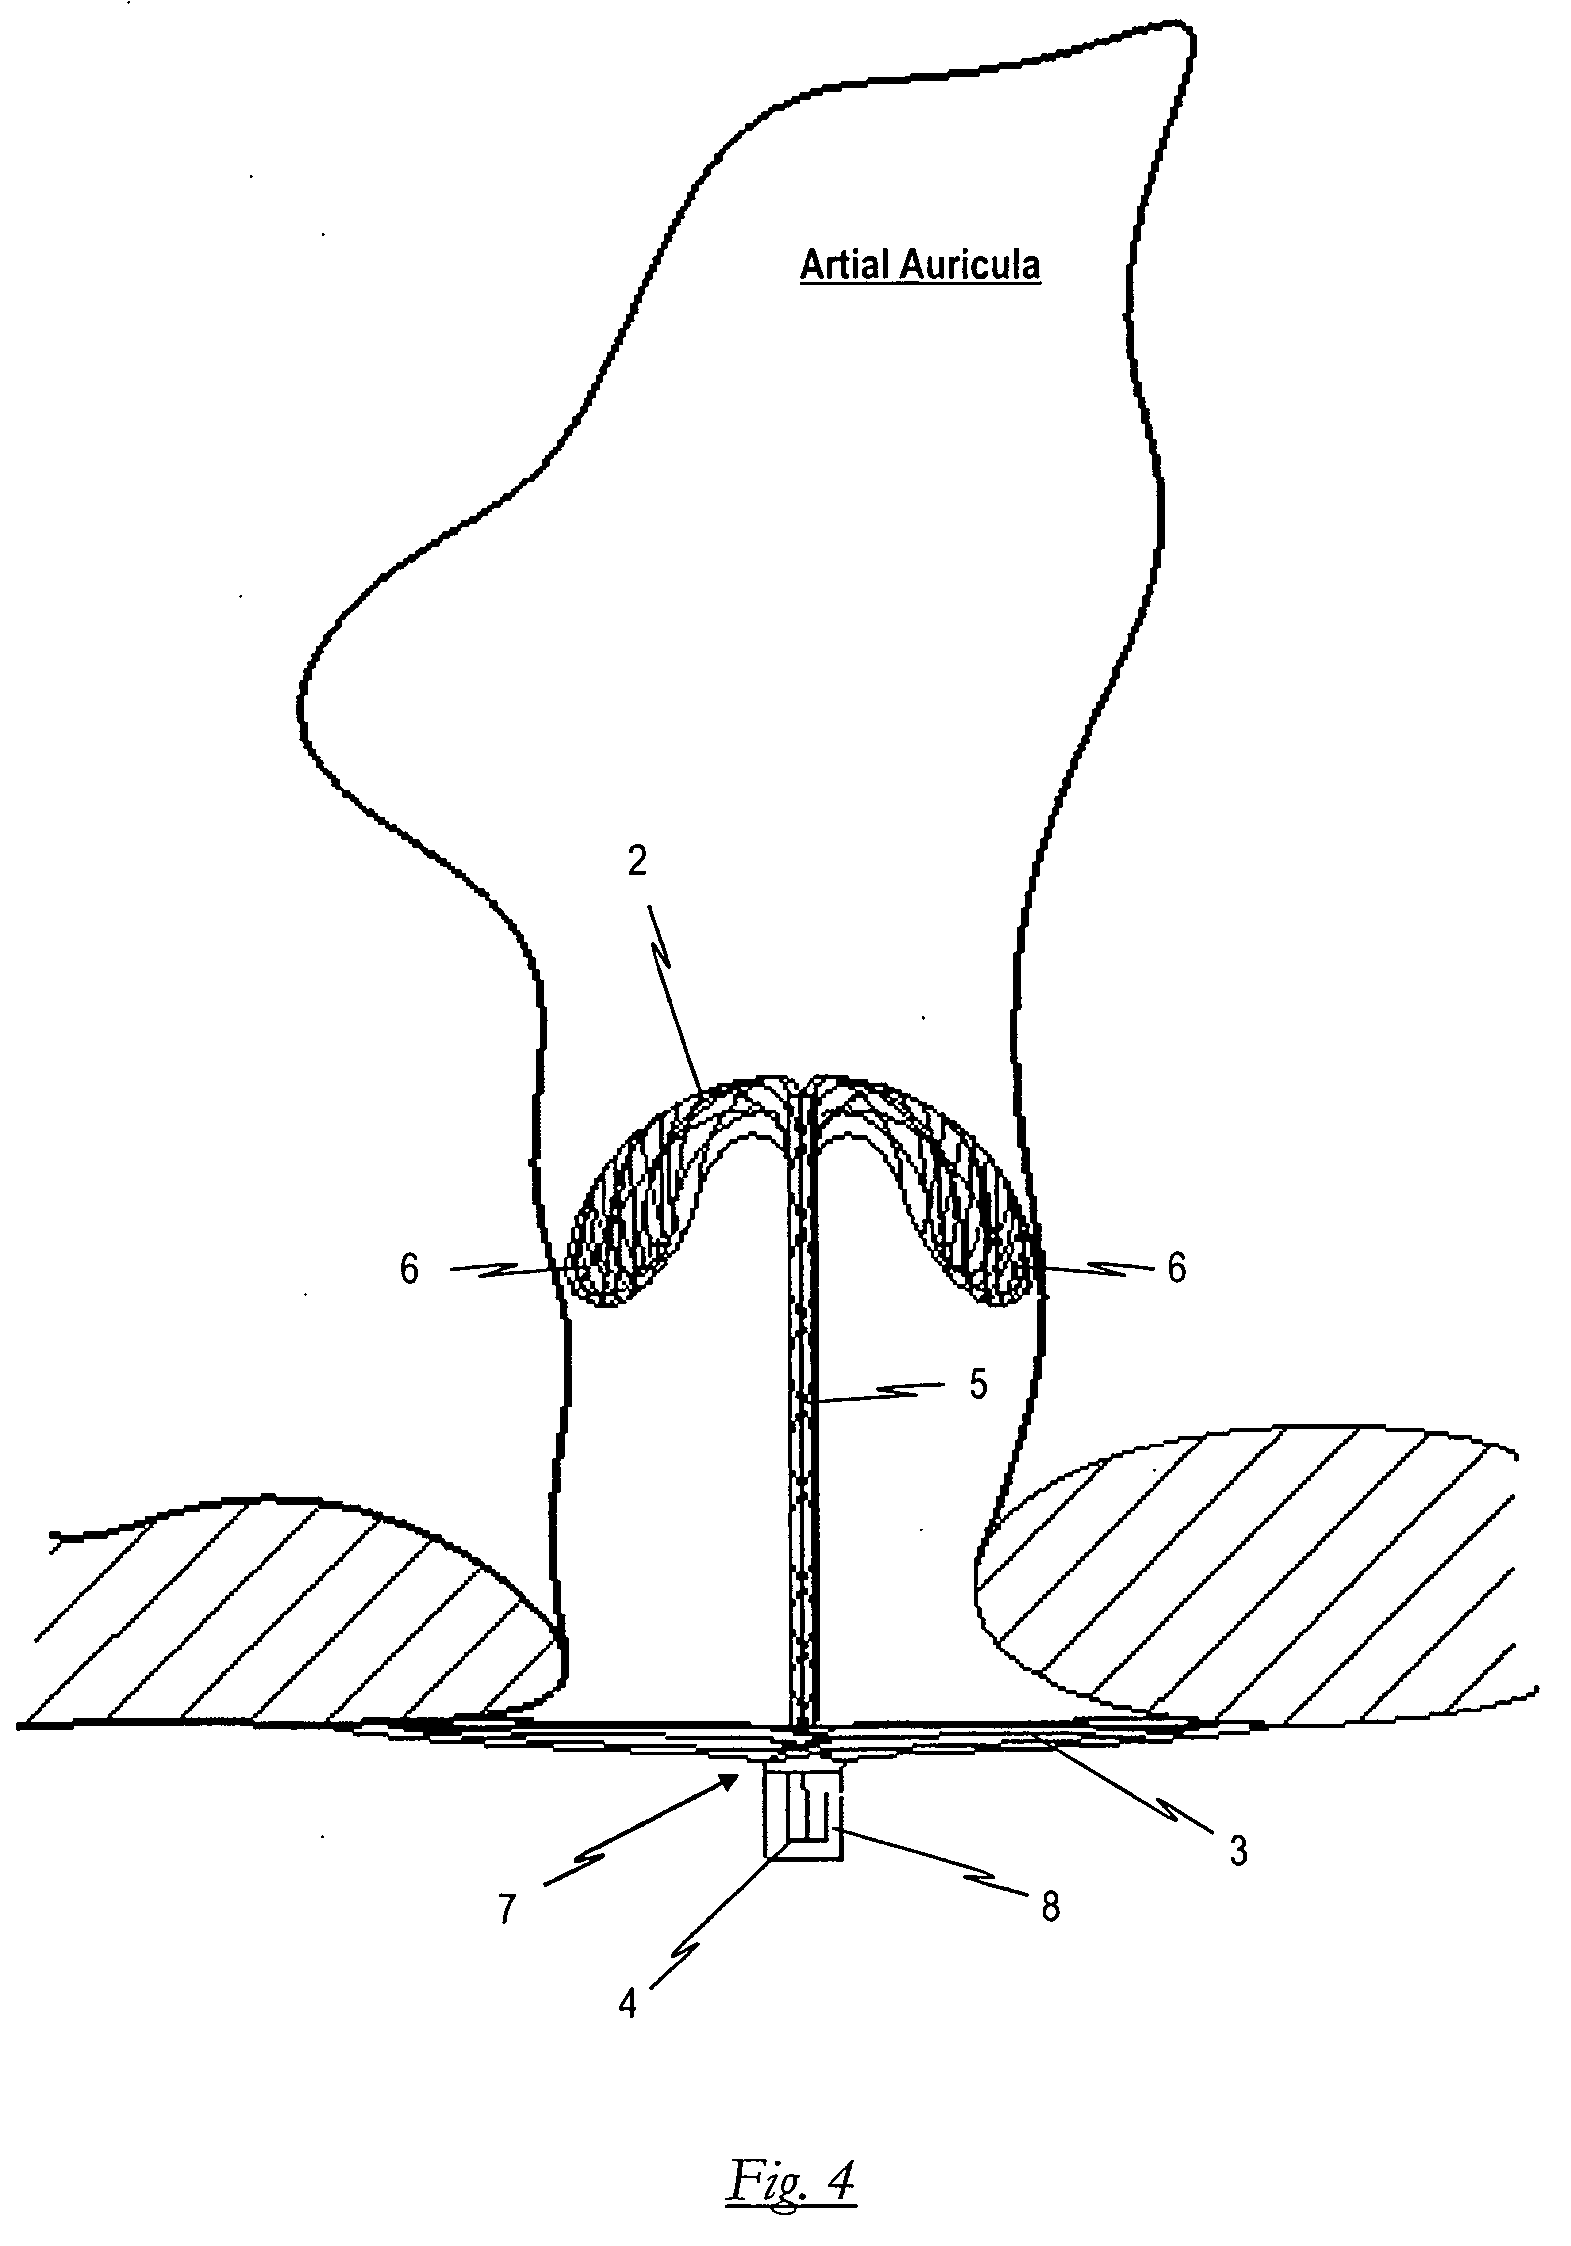 Occlusion device for occluding an atrial auricula and method for producing same